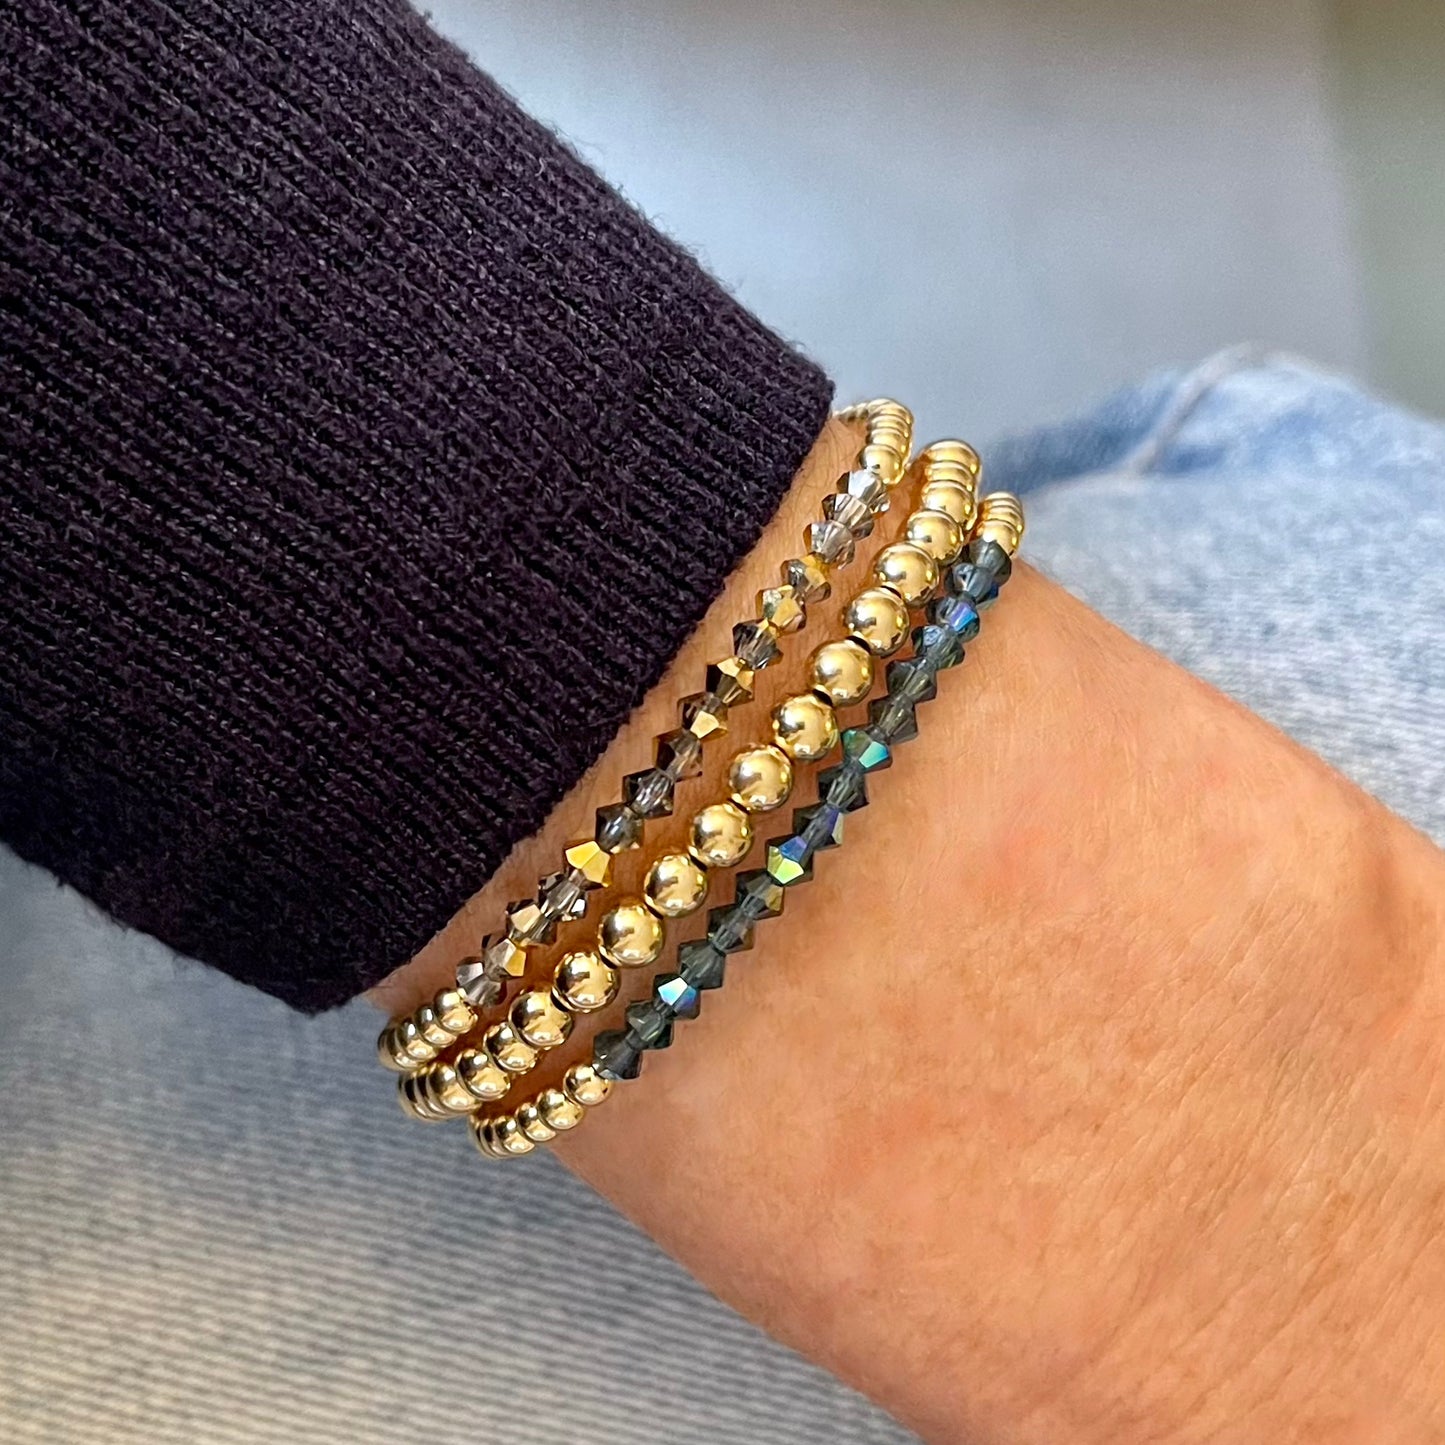 Crystal bead bracelets in grey and blue with 14K gold-filled 3mm and 4mm gold beads on stretch cord.